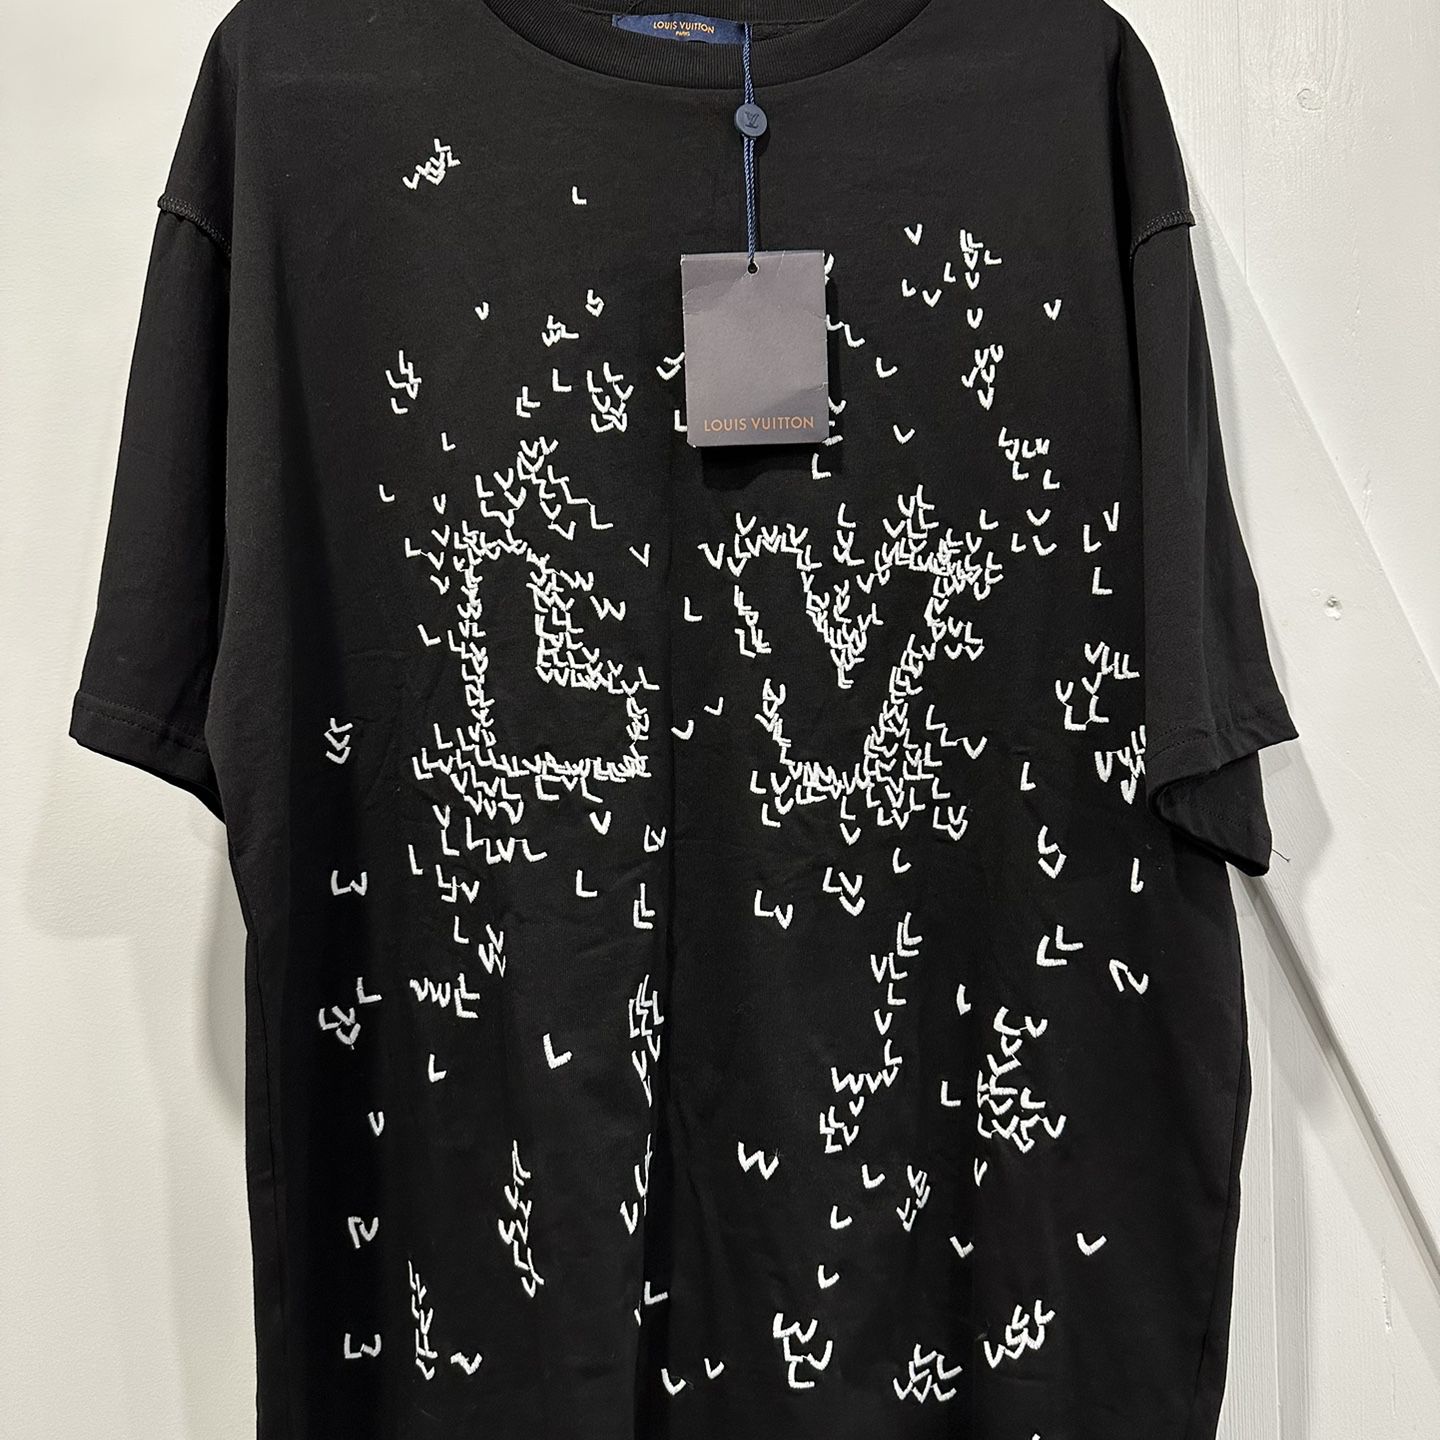 LV T-shirt Read Description for Sale in New York, NY - OfferUp